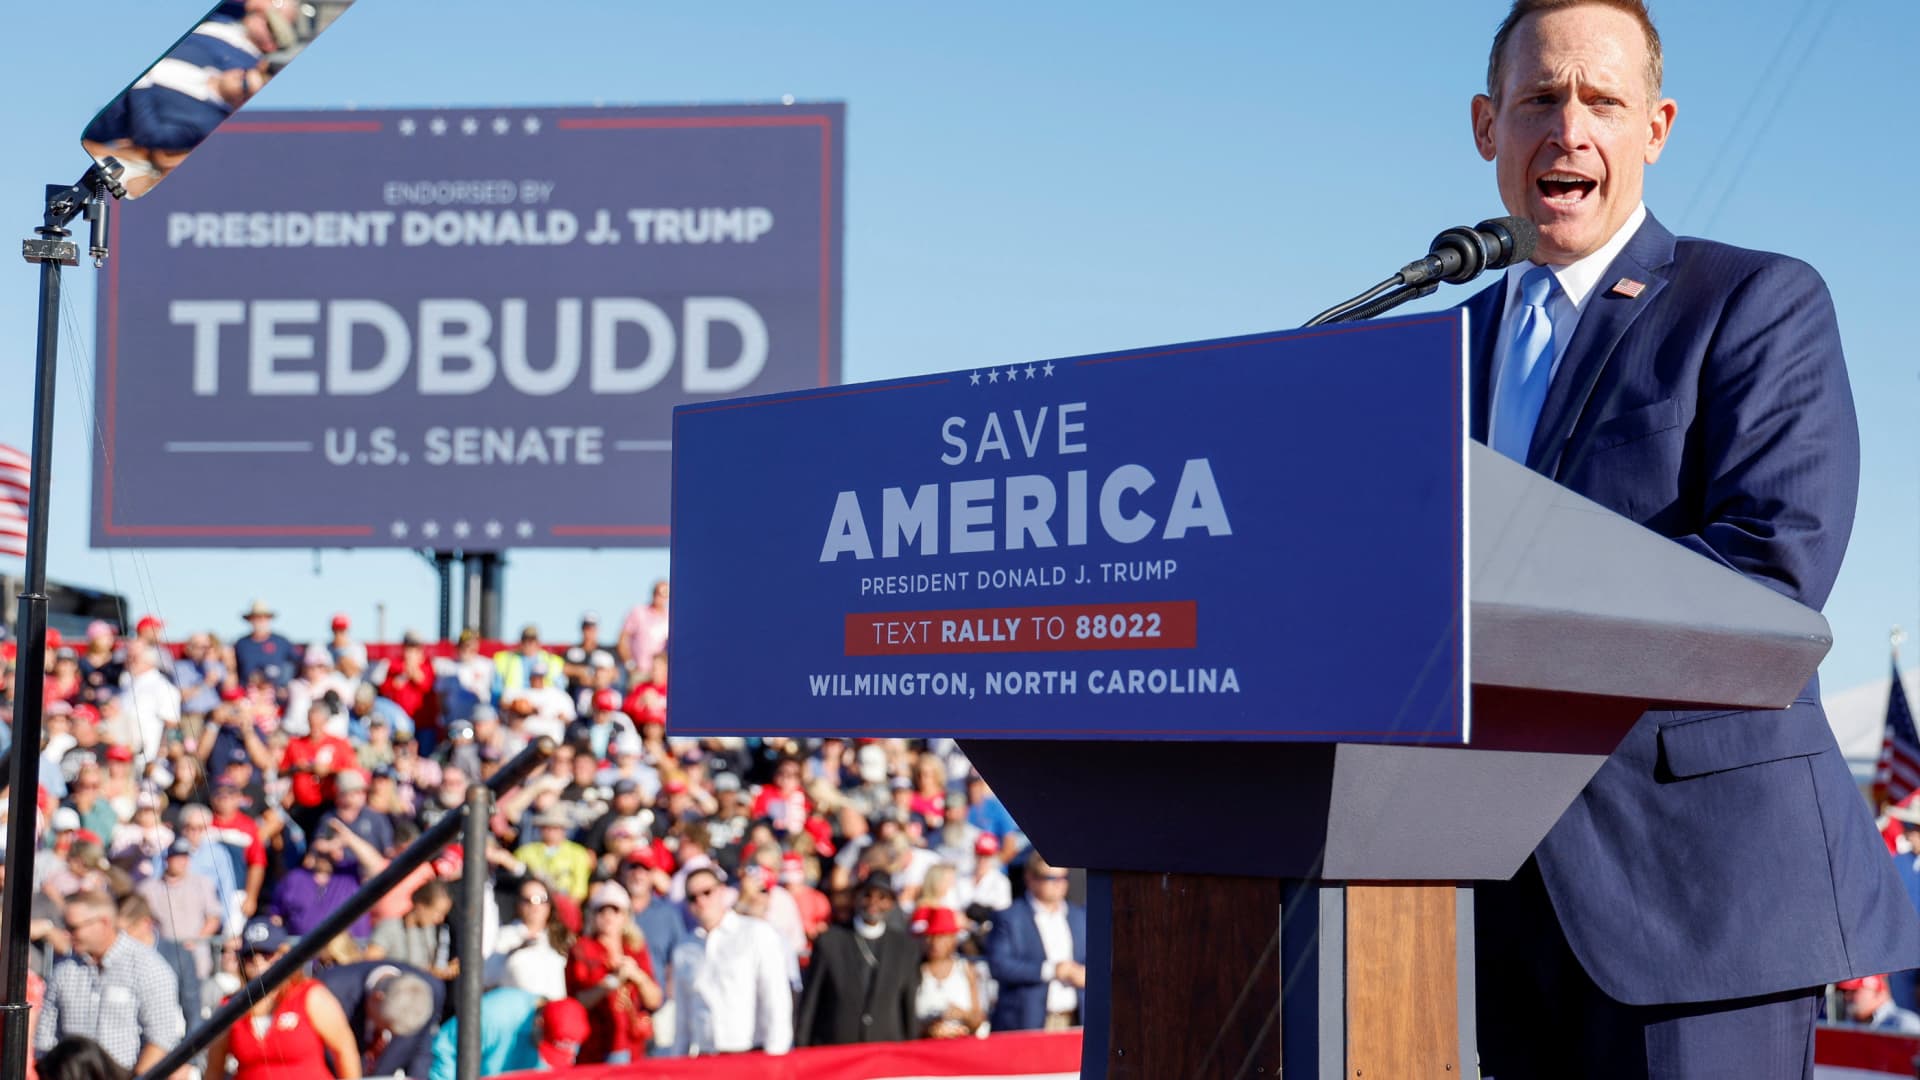 U.S. Rep. Ted Budd (R-NC), the North Carolina Republican nominee for U.S. Senate, takes the stage to deliver remarks ahead of a rally by former President Donald Trump at Wilmington International Airport in Wilmington, North Carolina, September 23, 2022.